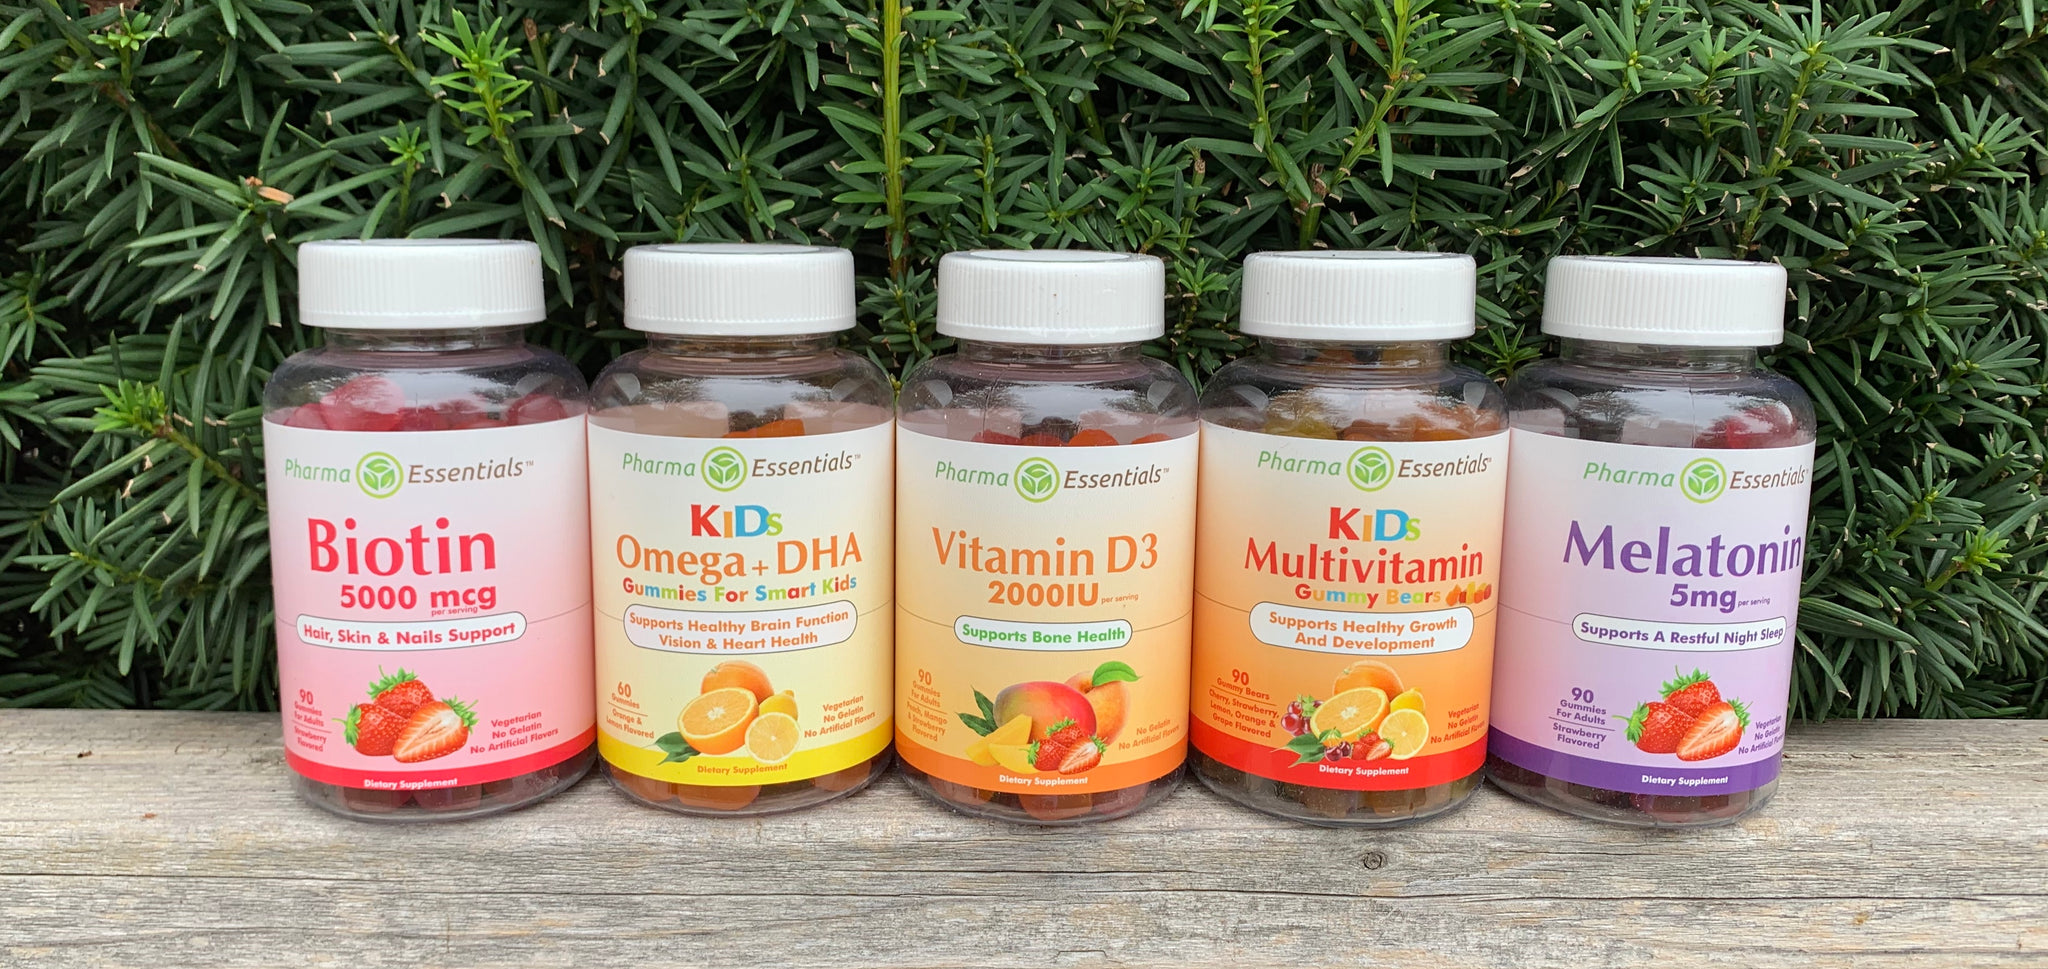 Gummy Vitamins can help support your immune system